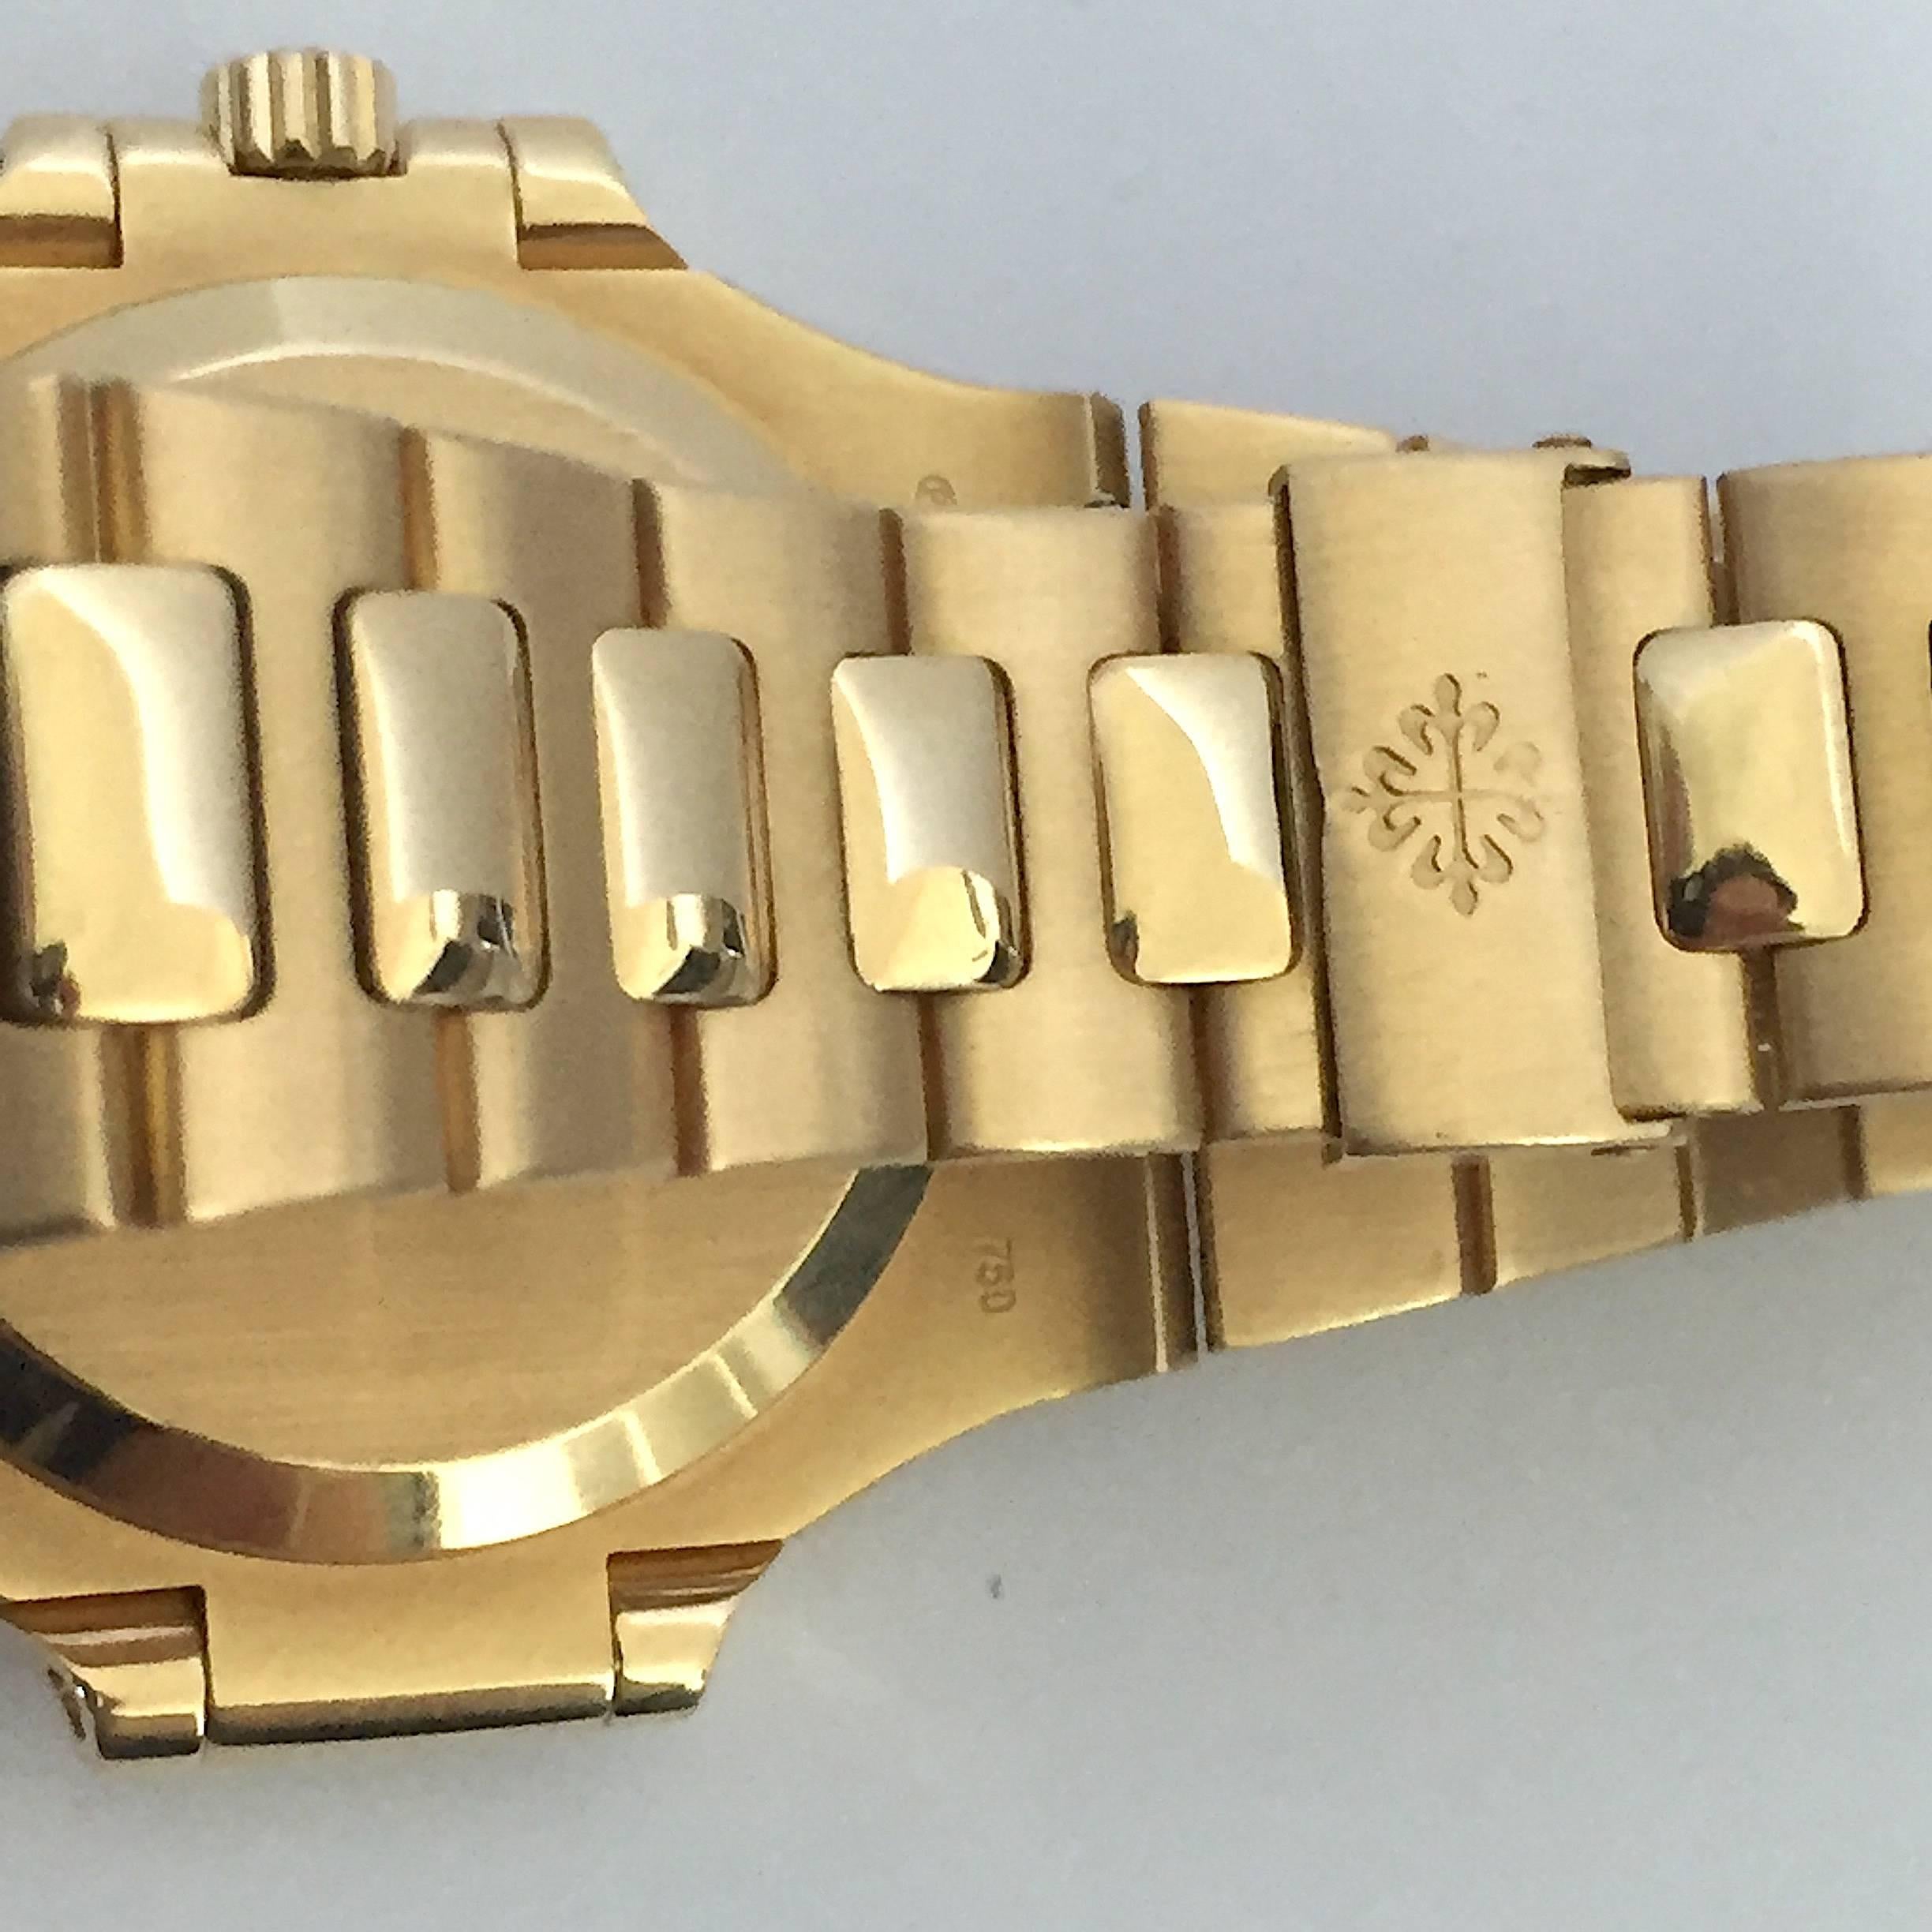 Patek Philippe Yellow Gold Nautilus Automatic Wristwatch, Ref 3800 For Sale 2